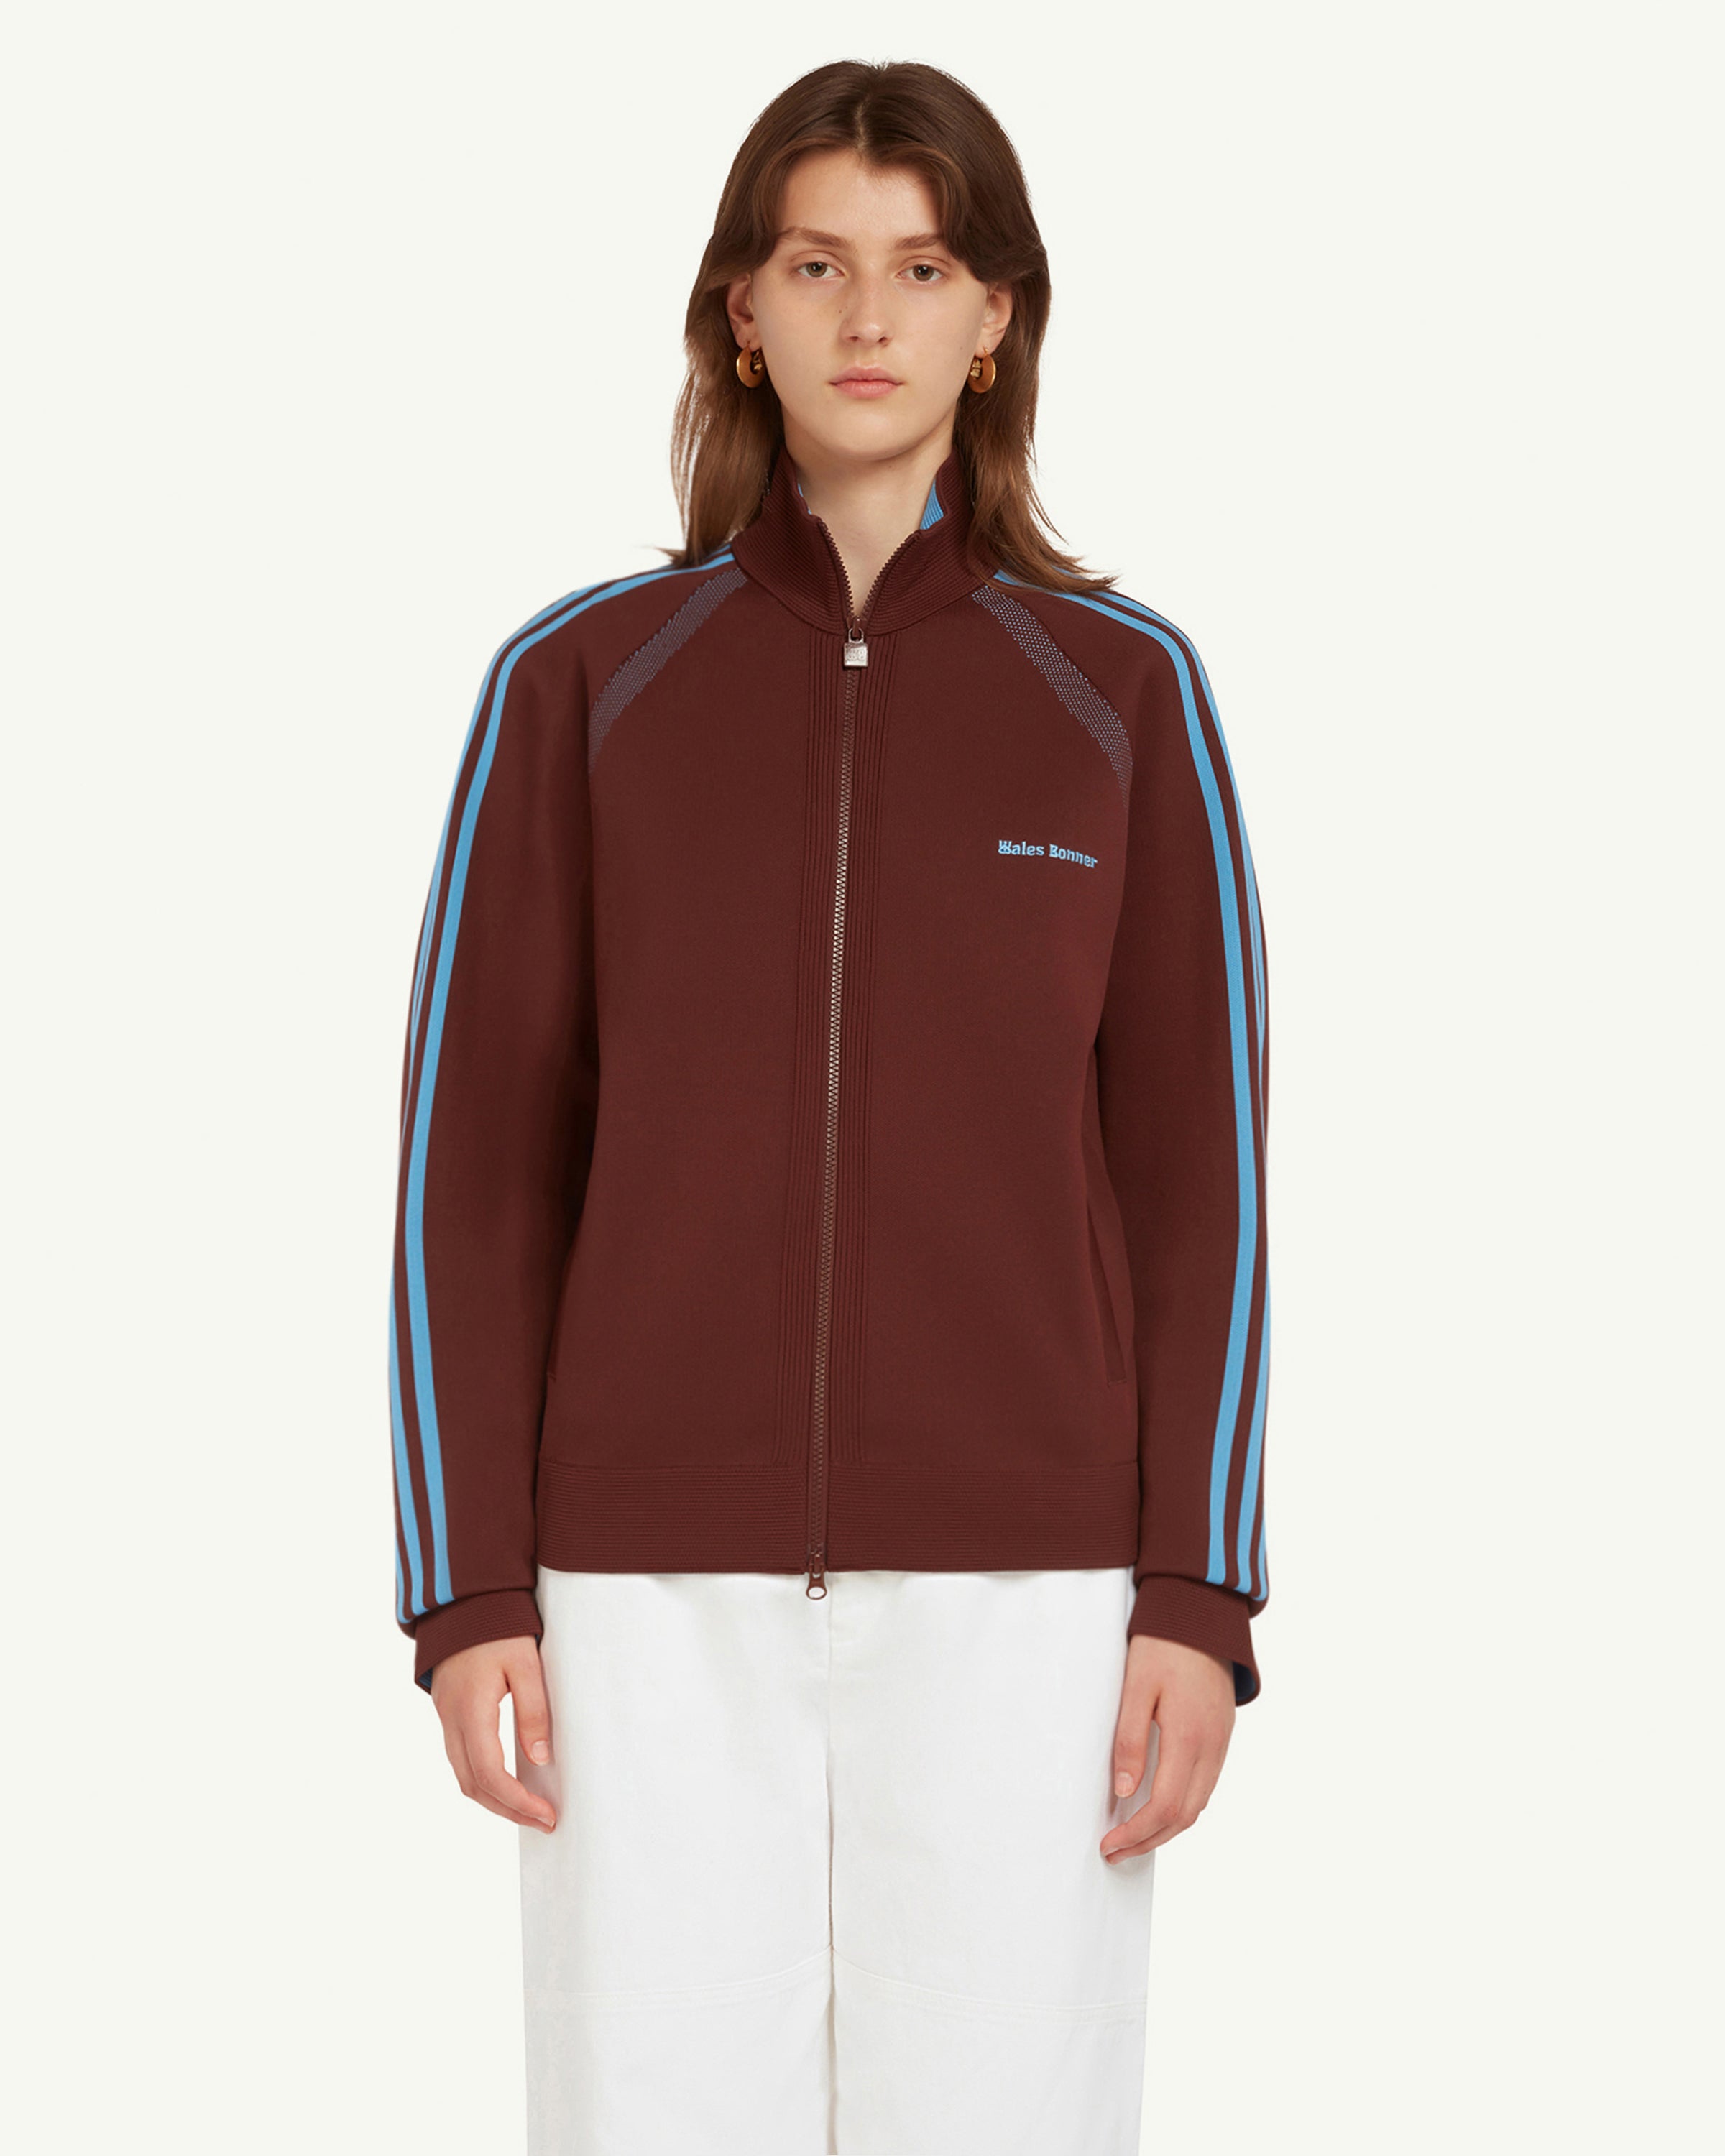 adidas Originals by Wales Bonner Knit Track Top